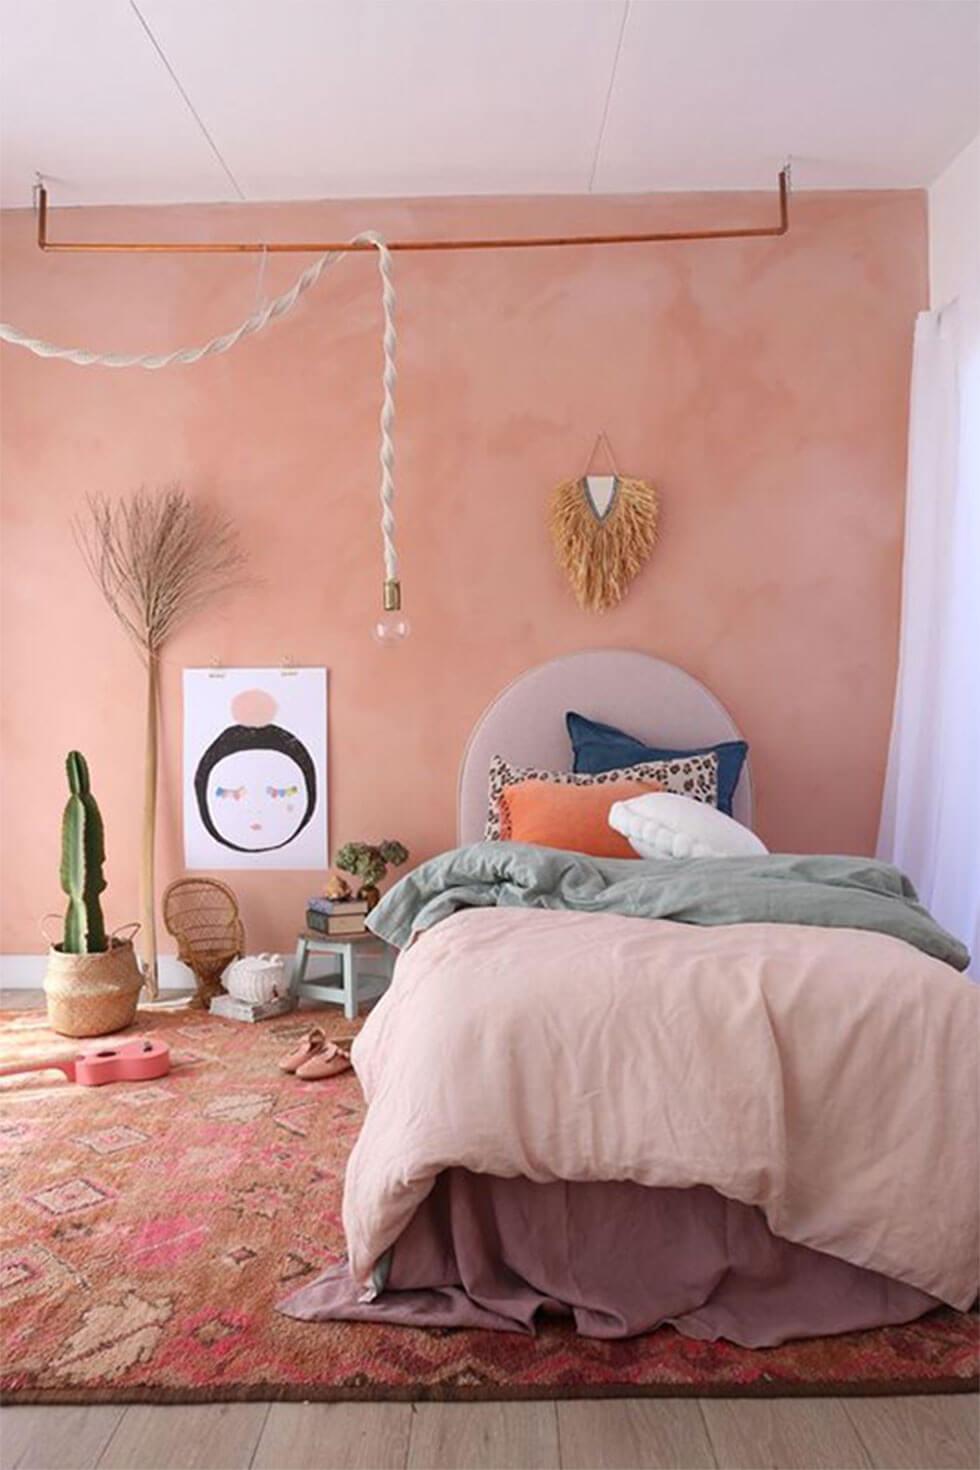 Bedroom walls painted dusky pink with bronze accents for a bohemian glam look.